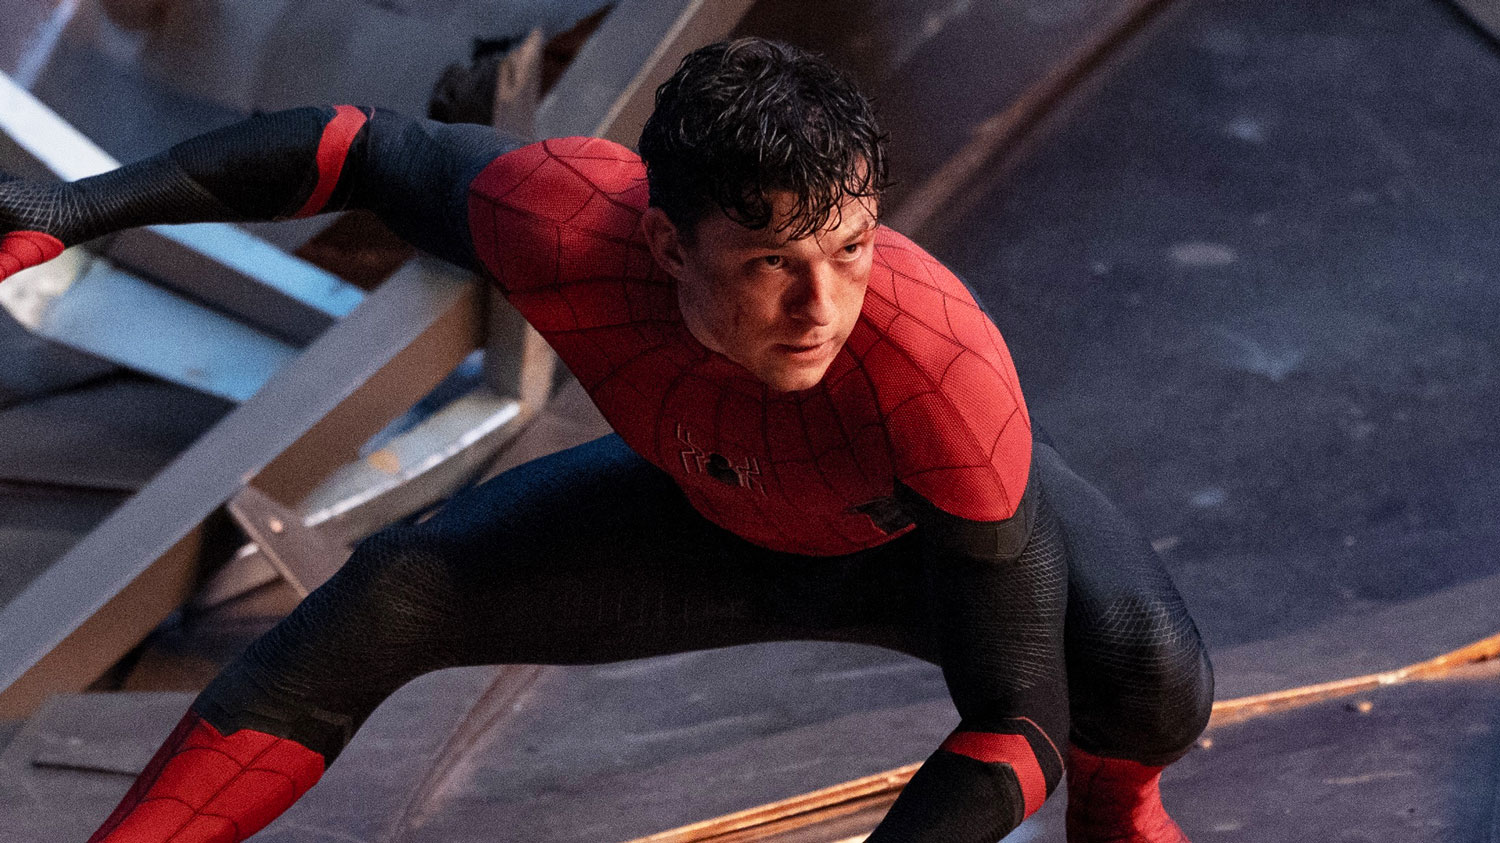 Spider-Man--No-Way-Home-To-Pass-Avatar's-Box-Office-Record